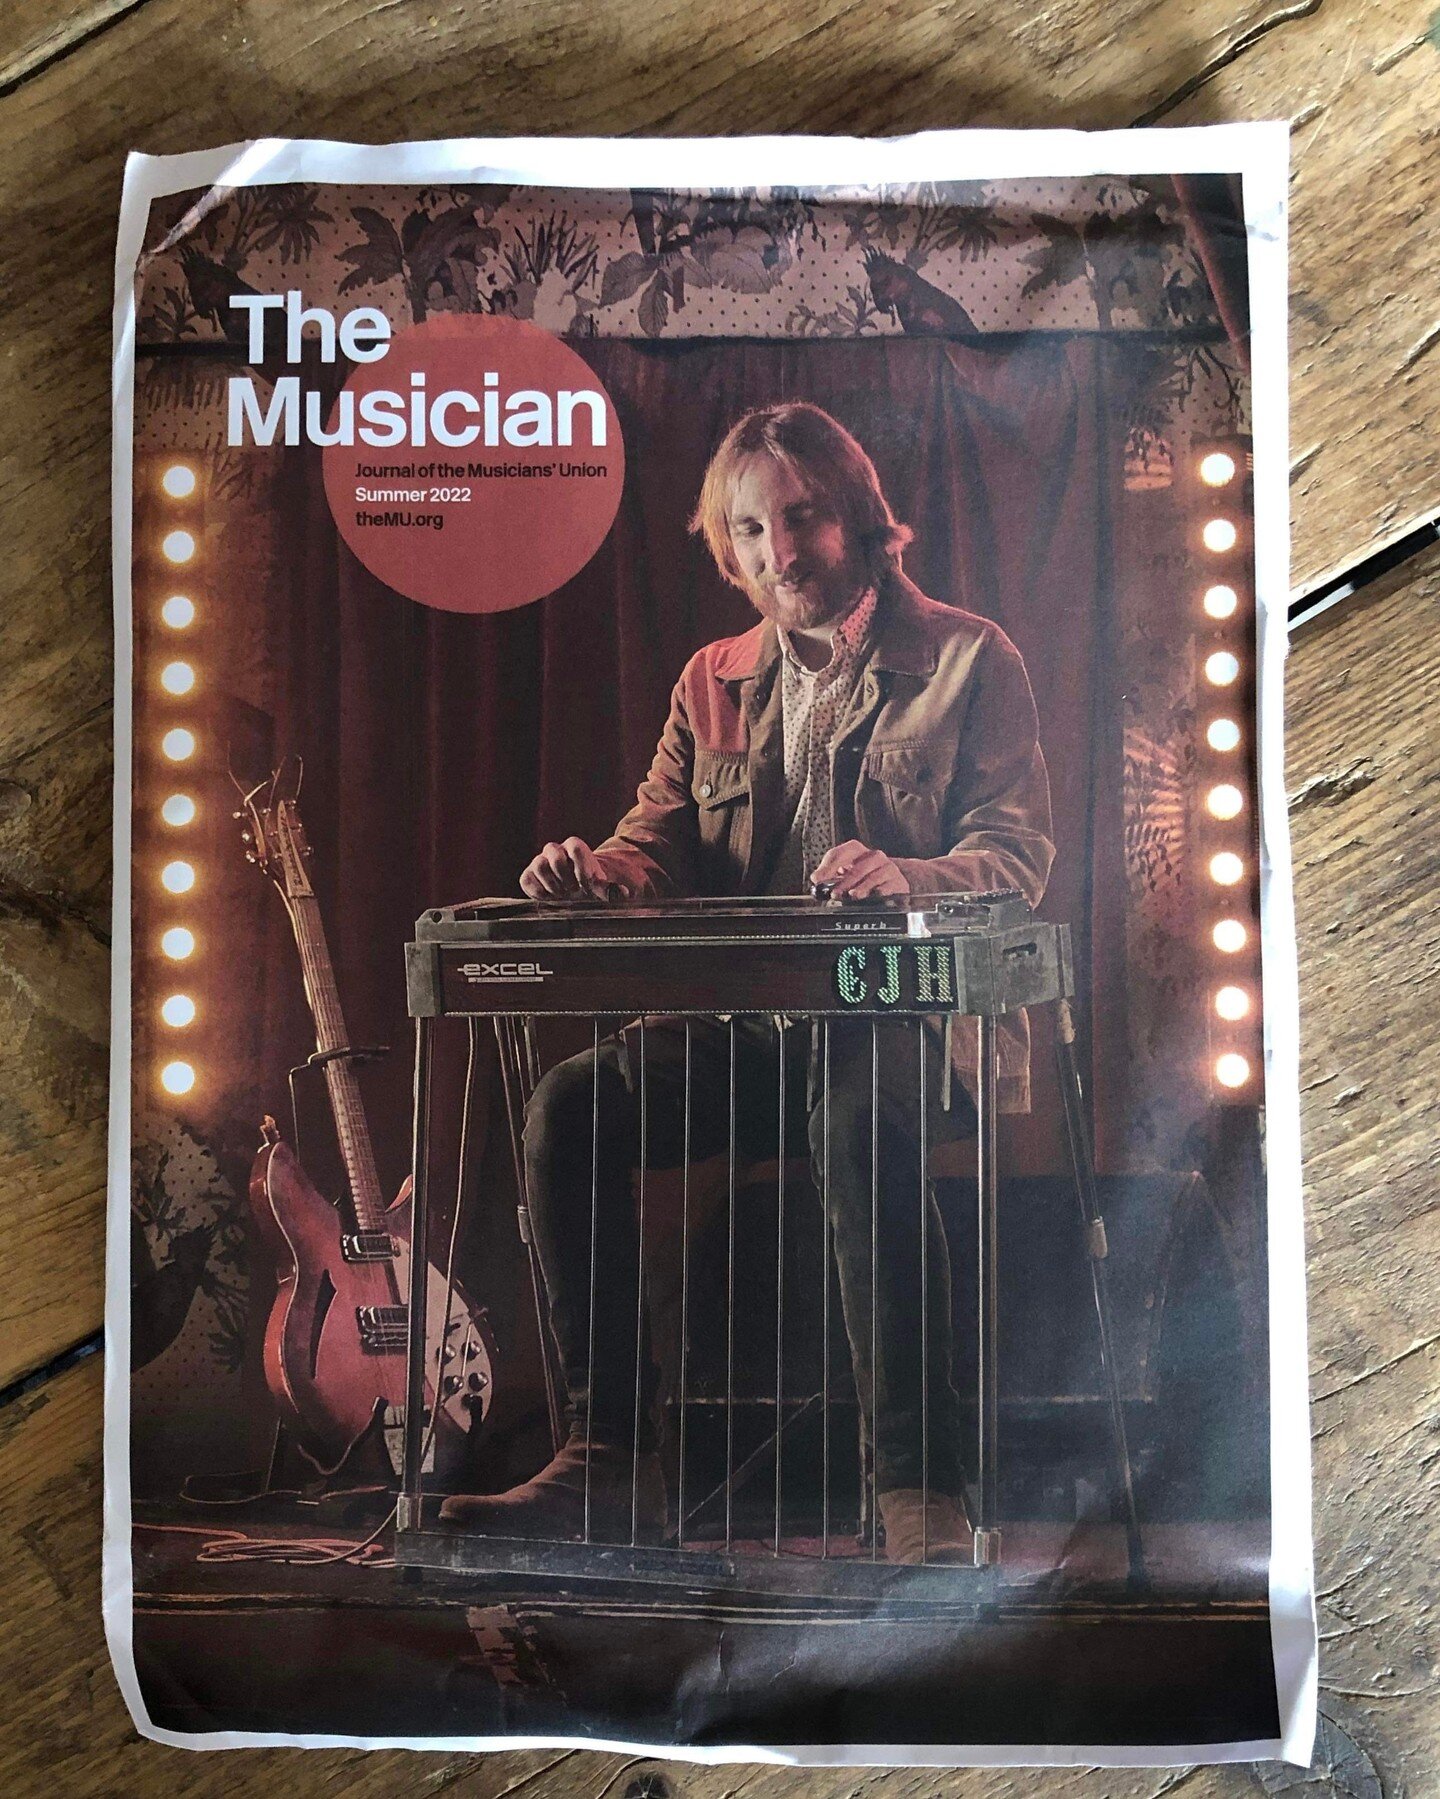 A big thanks to the @WeAreTheMU for writing this article on me and sticking my face on the front cover of their magazine. I had a great chat with @NeilCrossley3891 about the last 10 years of touring, playing the Pedal Steel Guitar and meeting Johnny 